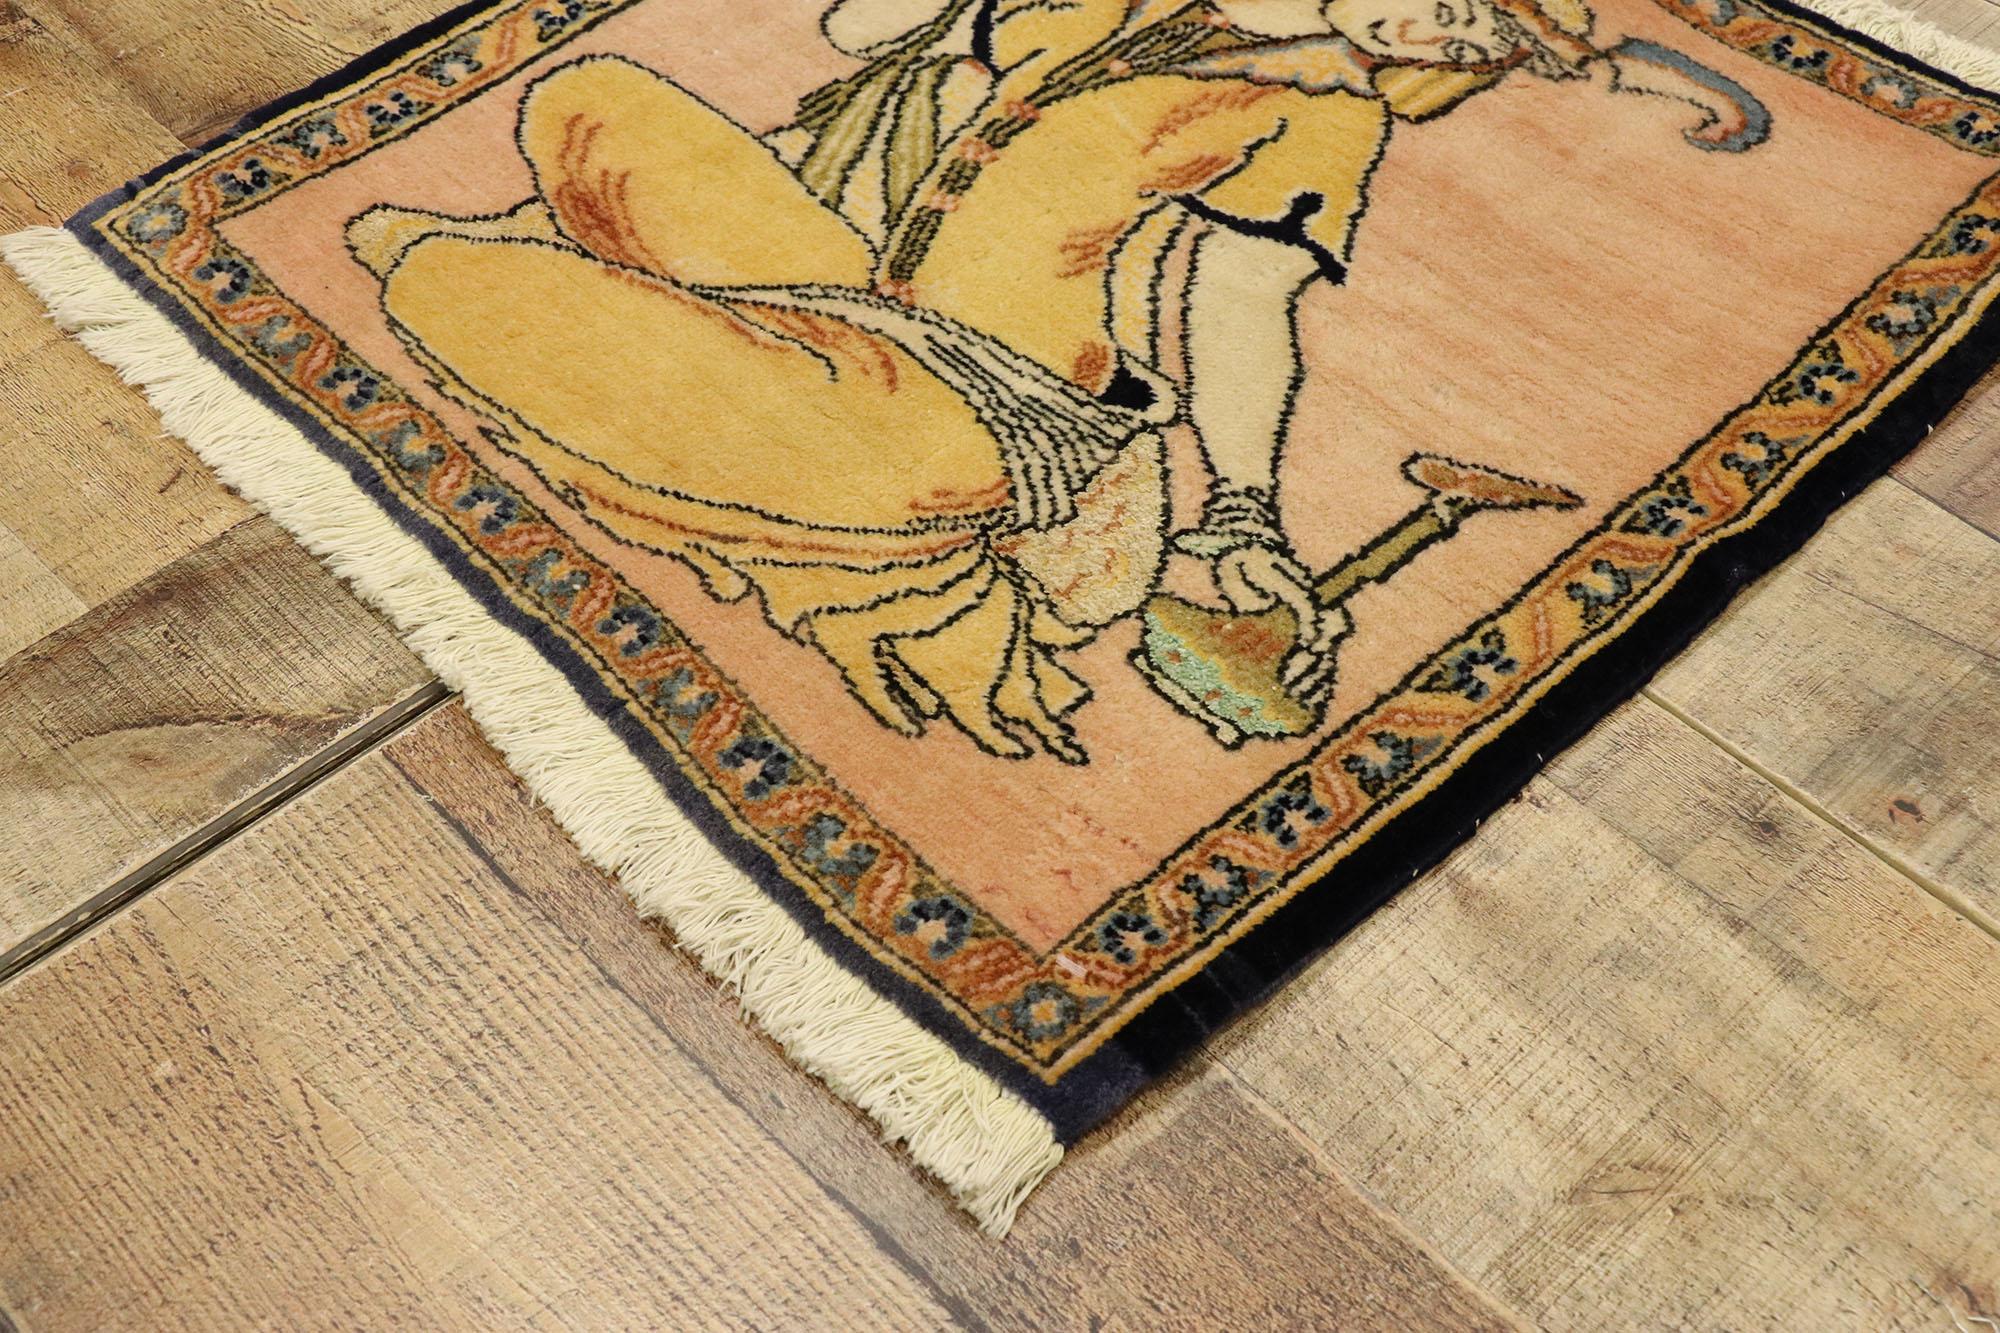 Hand-Knotted Vintage Persian Khamseh Pictorial Rug with Dervish Scene, Persian Wall Hanging For Sale